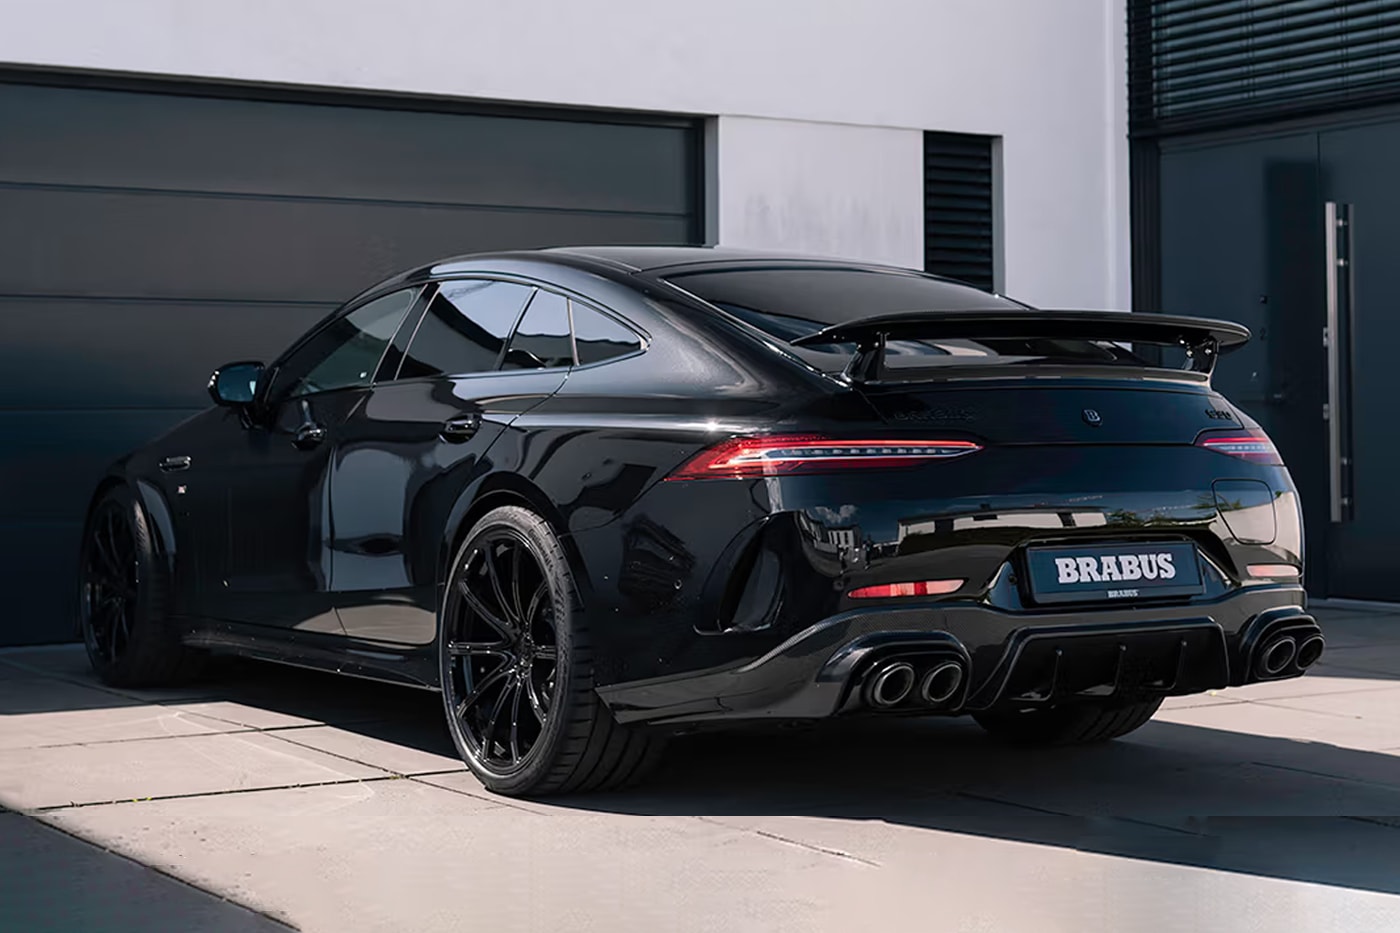 Brabus 930 Mercedes-AMG GT 63 S E PERFORMANCE Twin Turbo V8 Engine Hyper Car Performance Figures Speed Power Tuned 